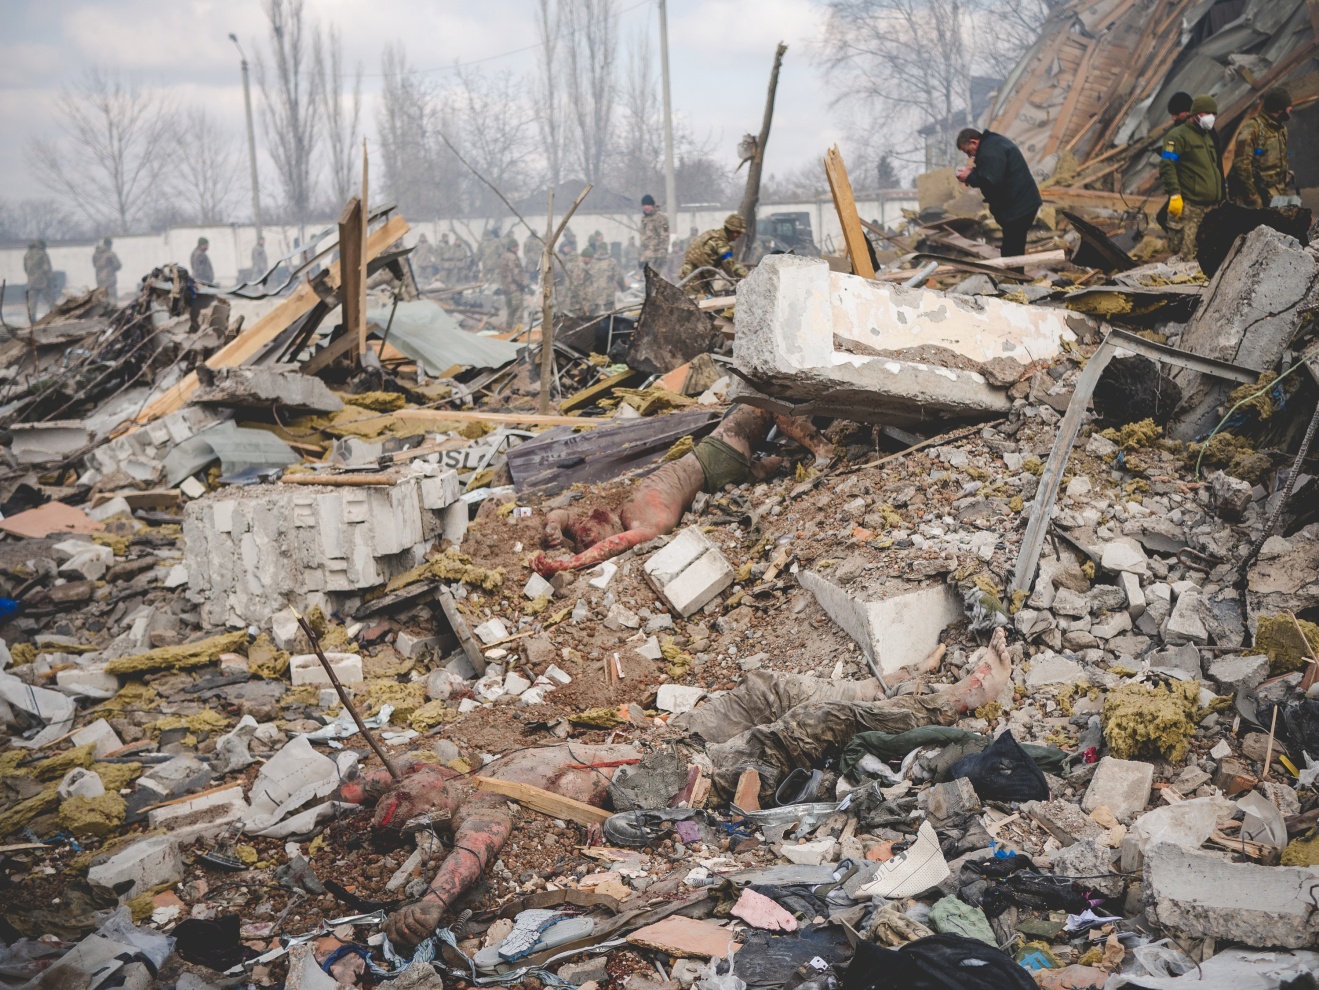 004_brokenpromises - Ukraine; Mykolaiv; 2022

Ukrainian military base bombed by the Russian aircraft. More than 40 soldiers died while they were sleeping. 
The attack is one of the several that happened since the dawn in all the South area of Ukraine. 